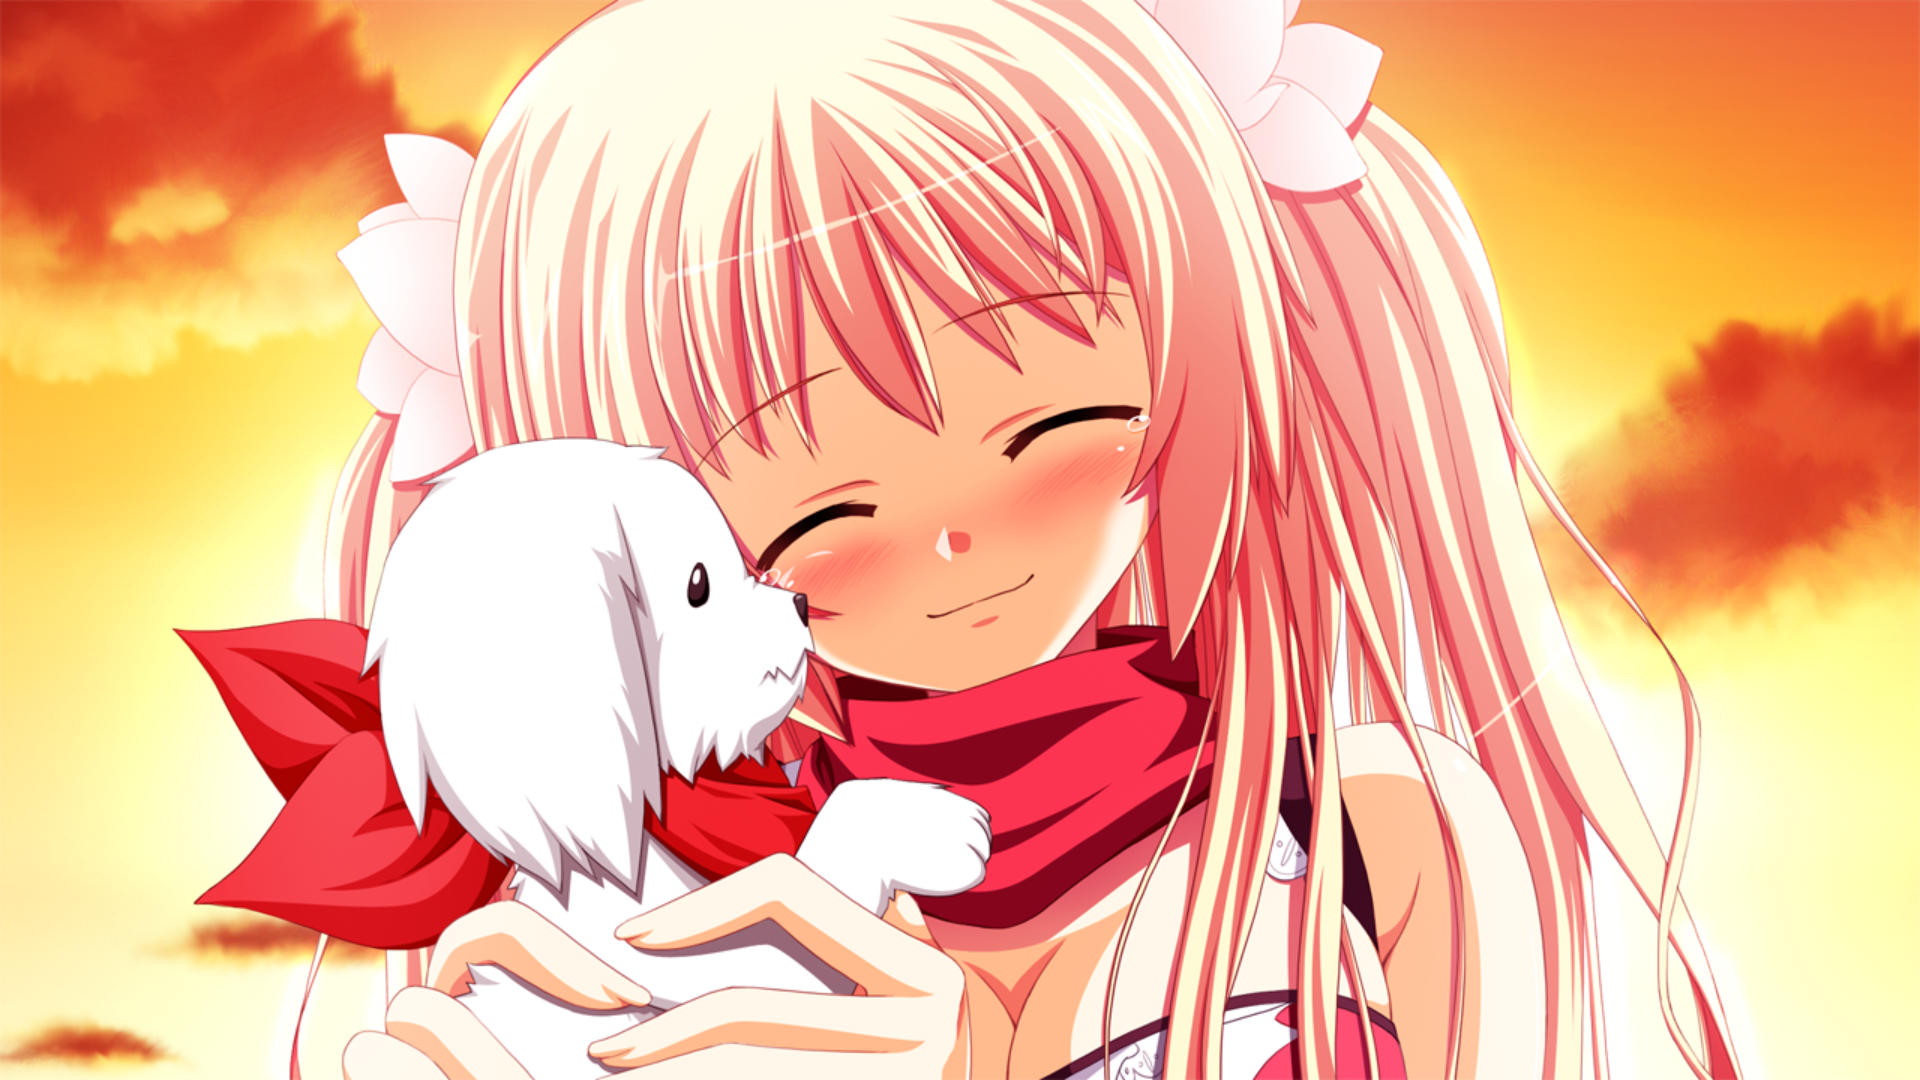 Report Abuse - Cute Anime Girl With Puppy Transparent PNG - 446x560 - Free  Download on NicePNG